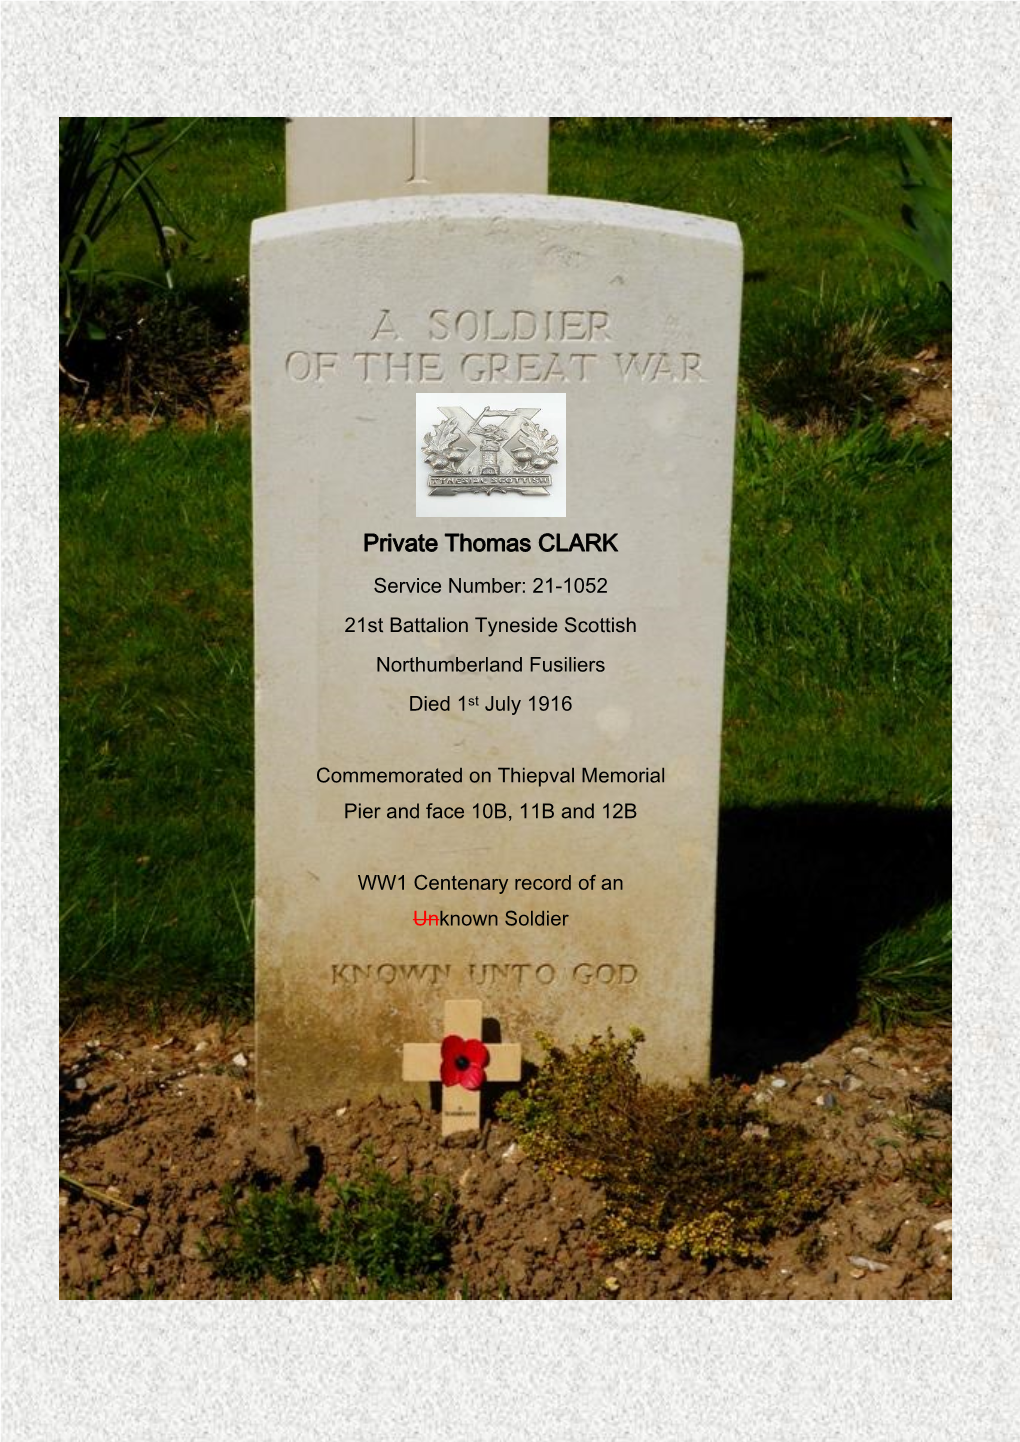 Private Thomas CLARK Service Number: 21-1052 21St Battalion Tyneside Scottish Northumberland Fusiliers Died 1St July 1916